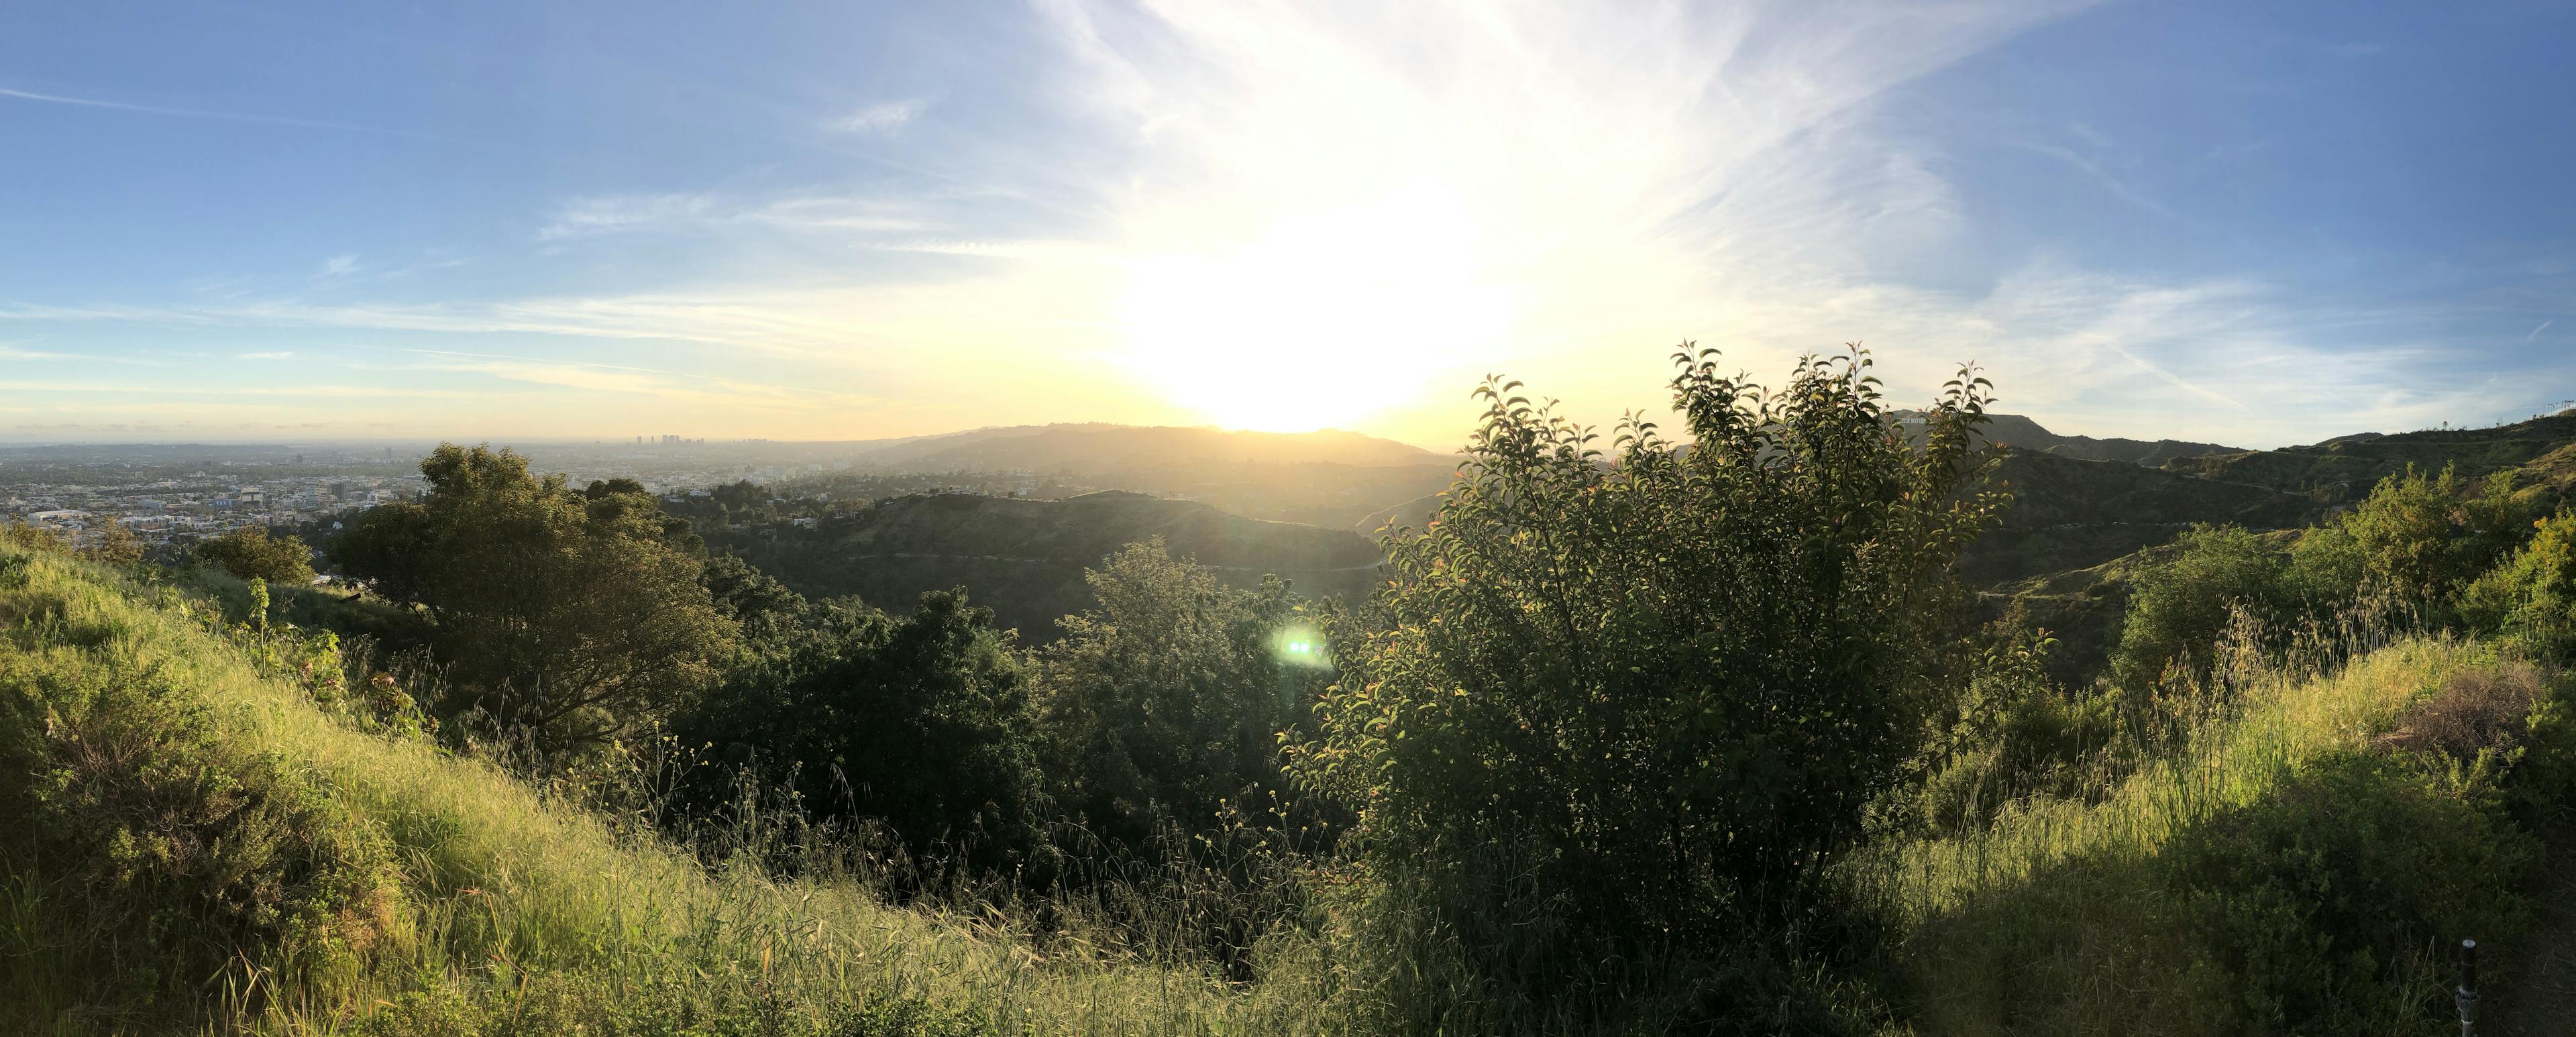 Sunny panorama of Hollywood landscape from the perspective of the Griffith Observatory.